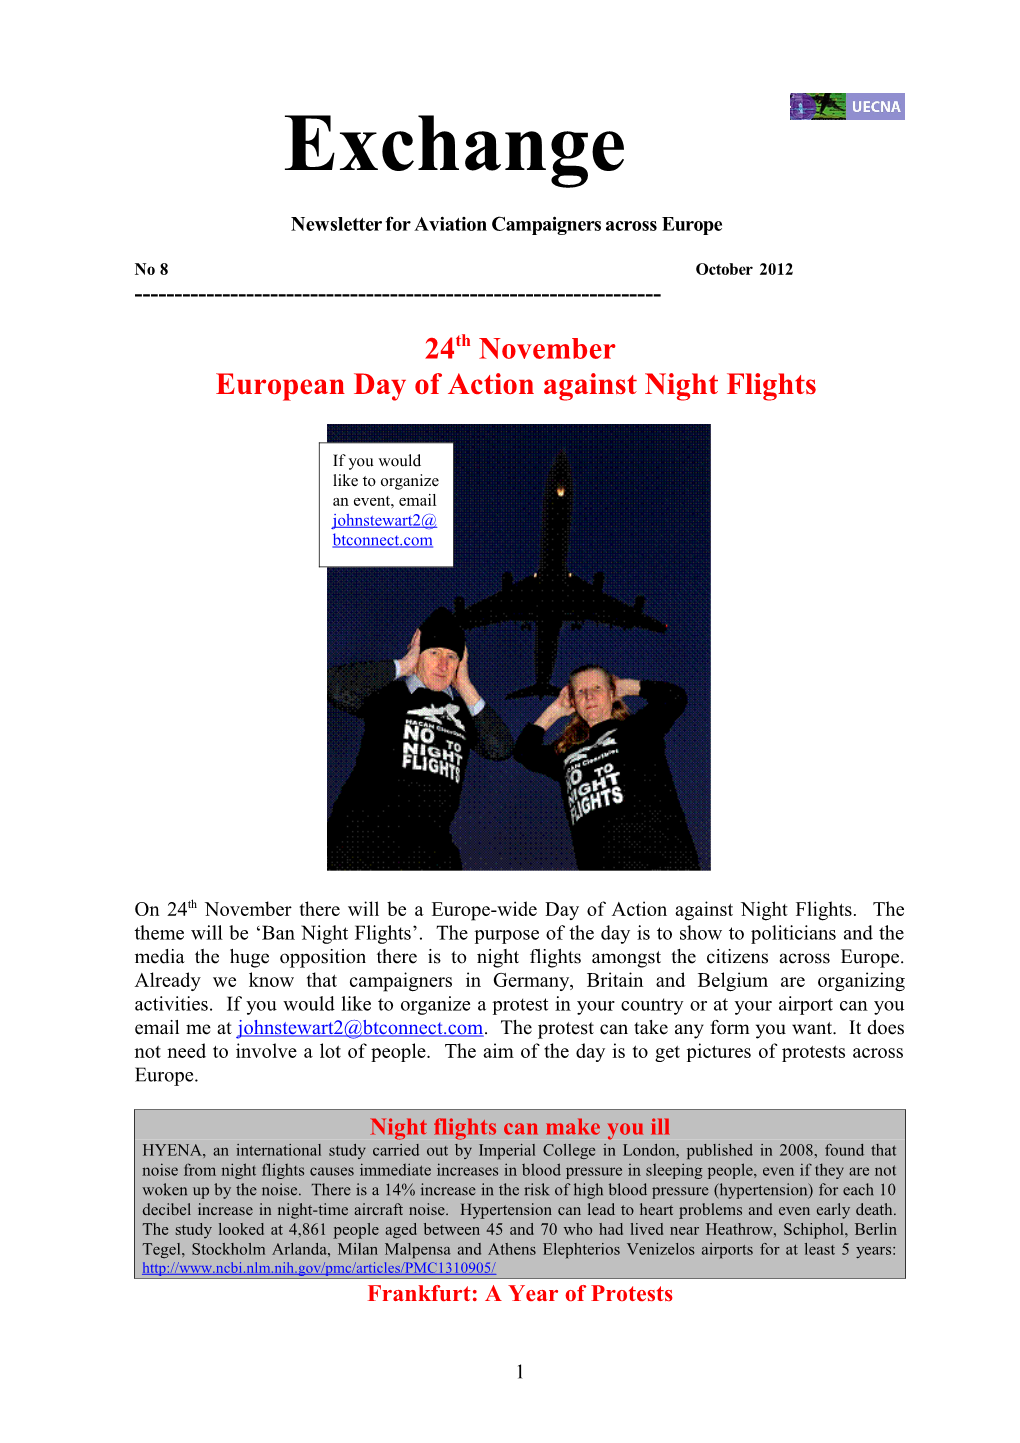 Newsletter for Aviation Campaigners Across Europe